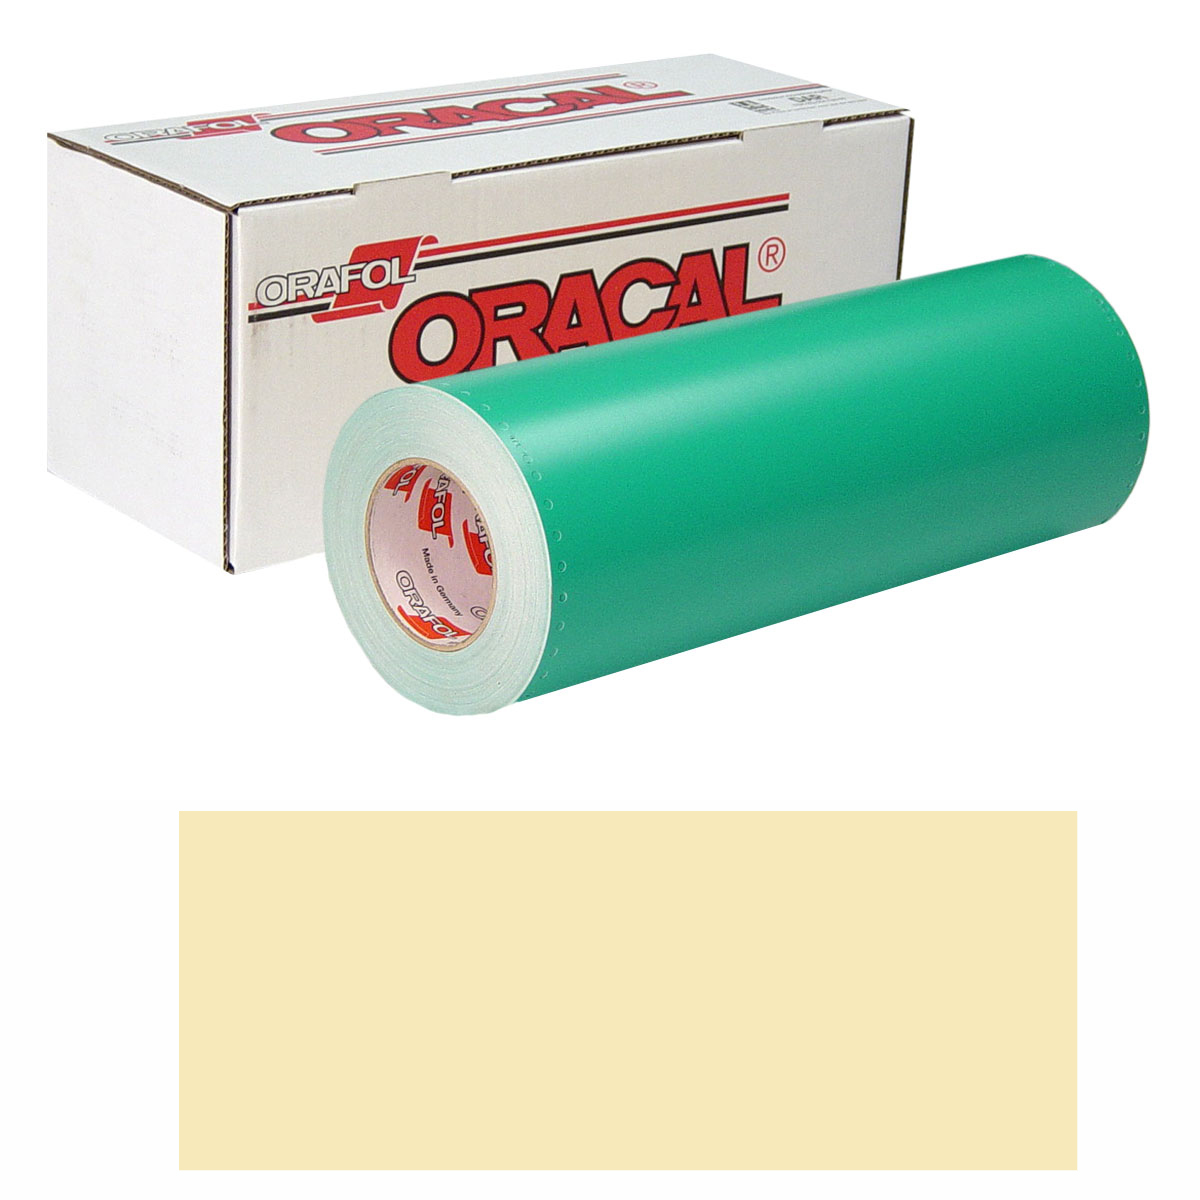 ORACAL 8500 30in X 50yd 805 Ivory